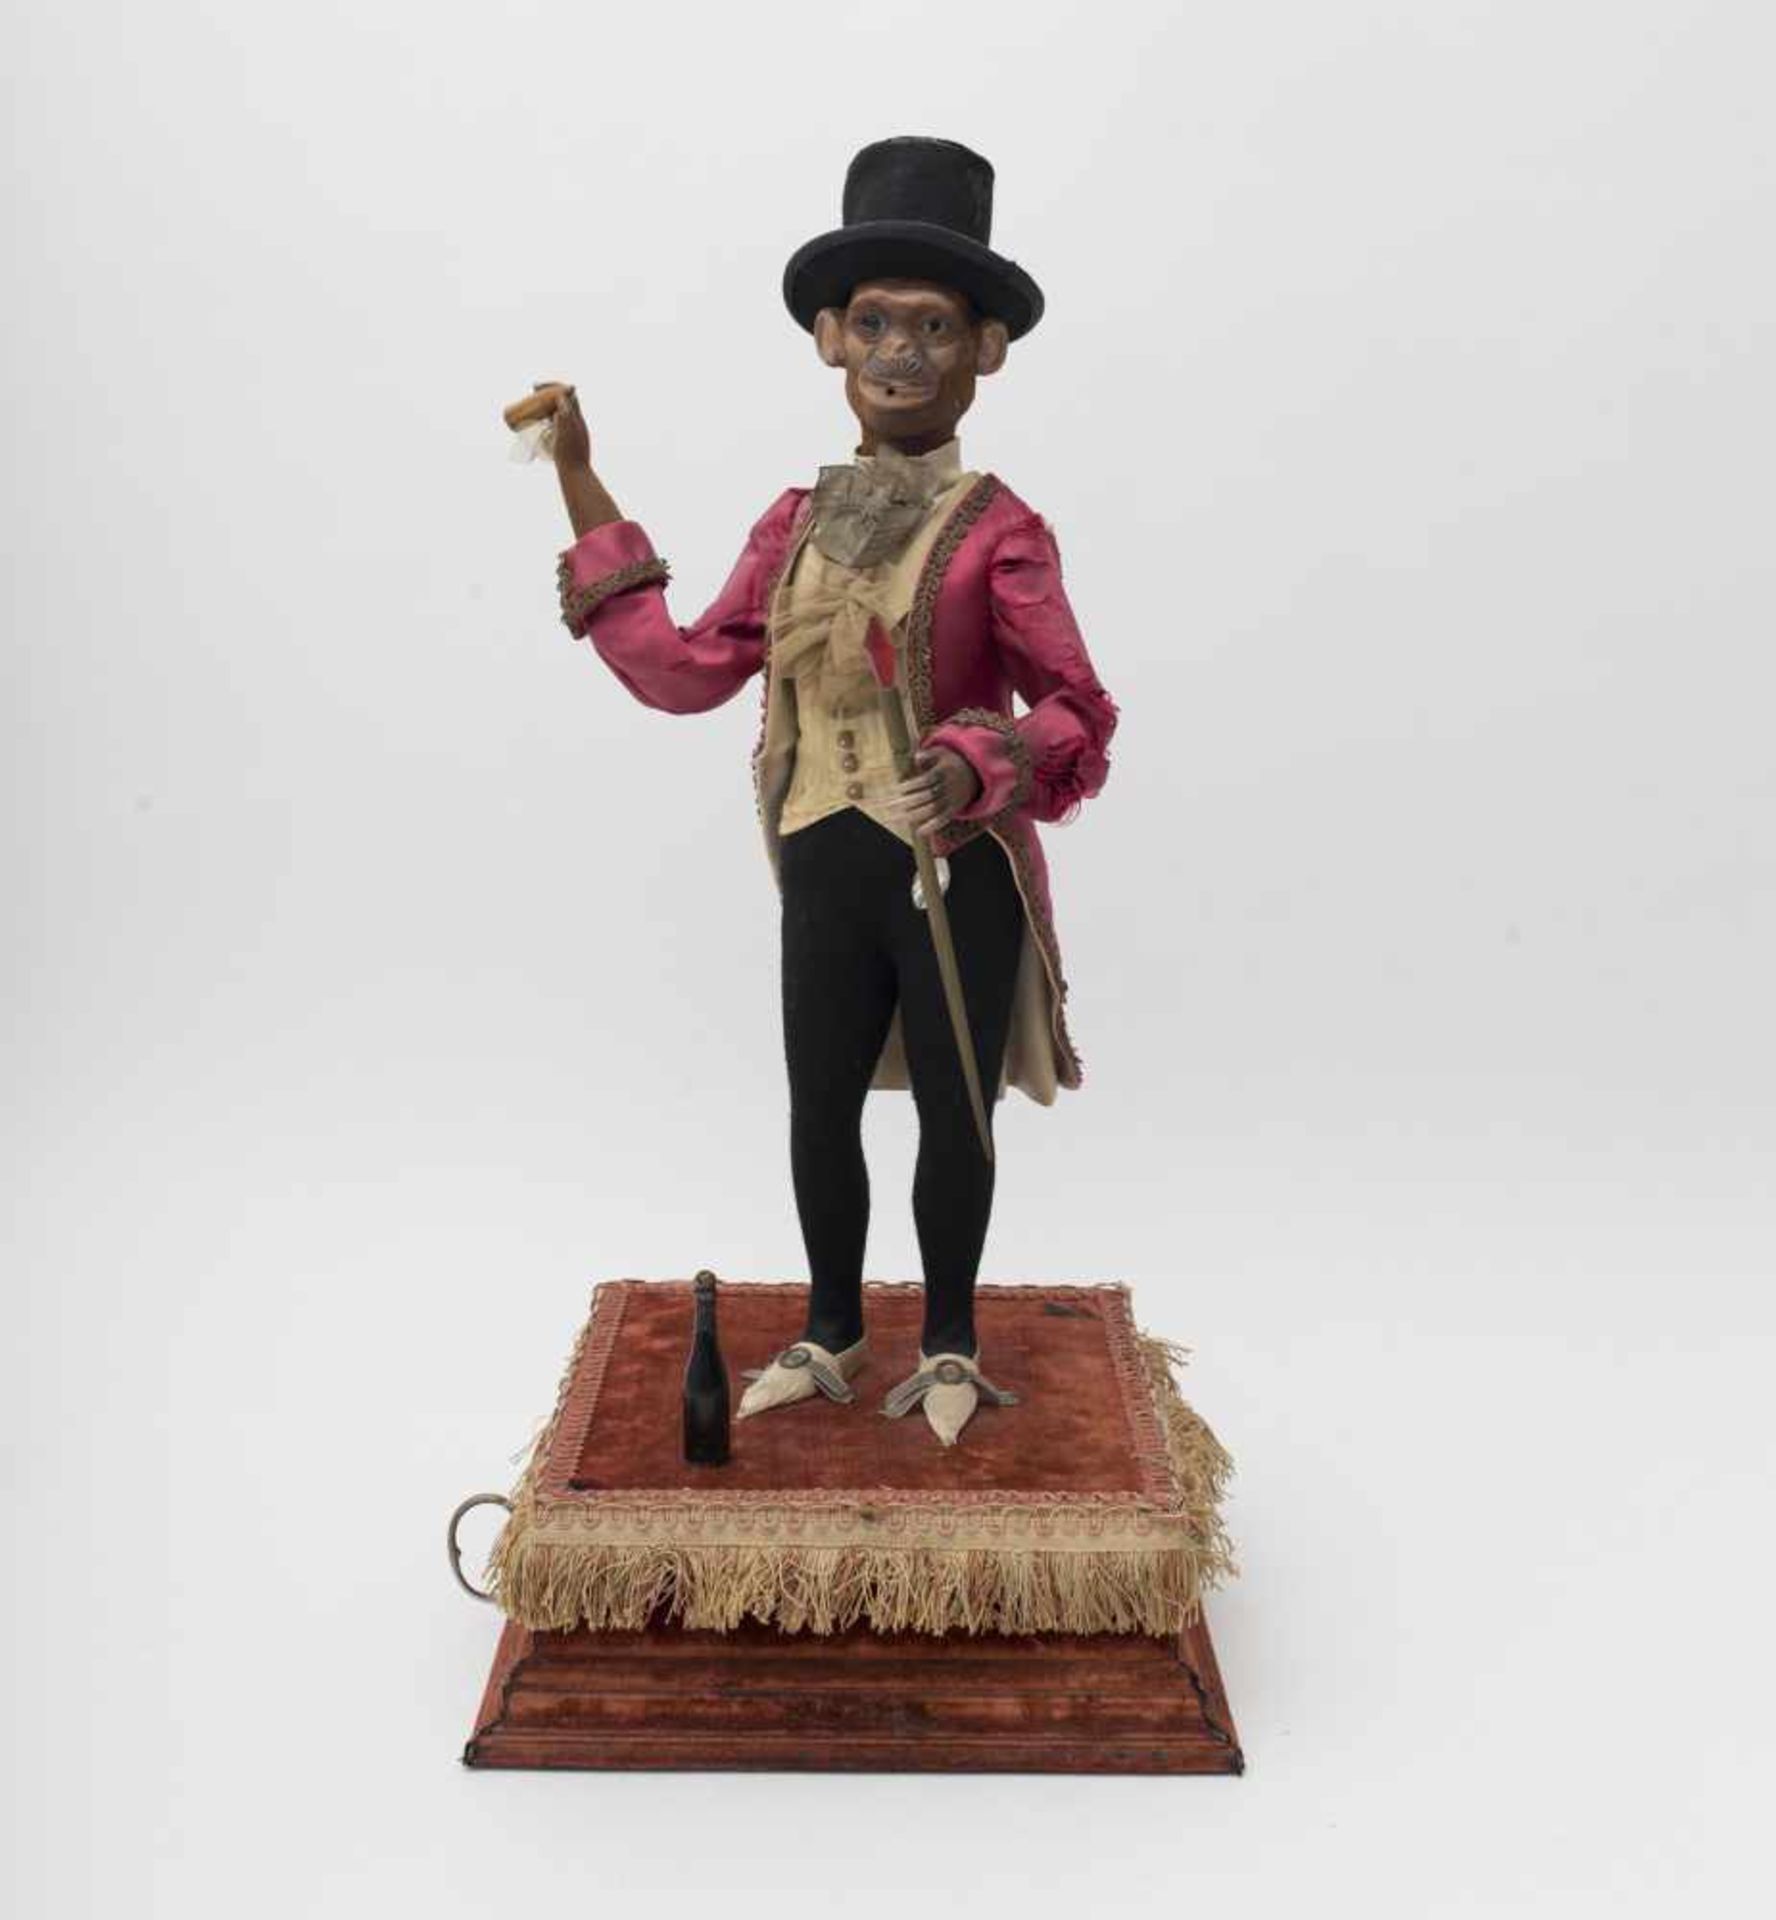 The DANDY FUMEUR  ROULLET DECAMPS style automaton, depicting a person with a smoking monkey’s